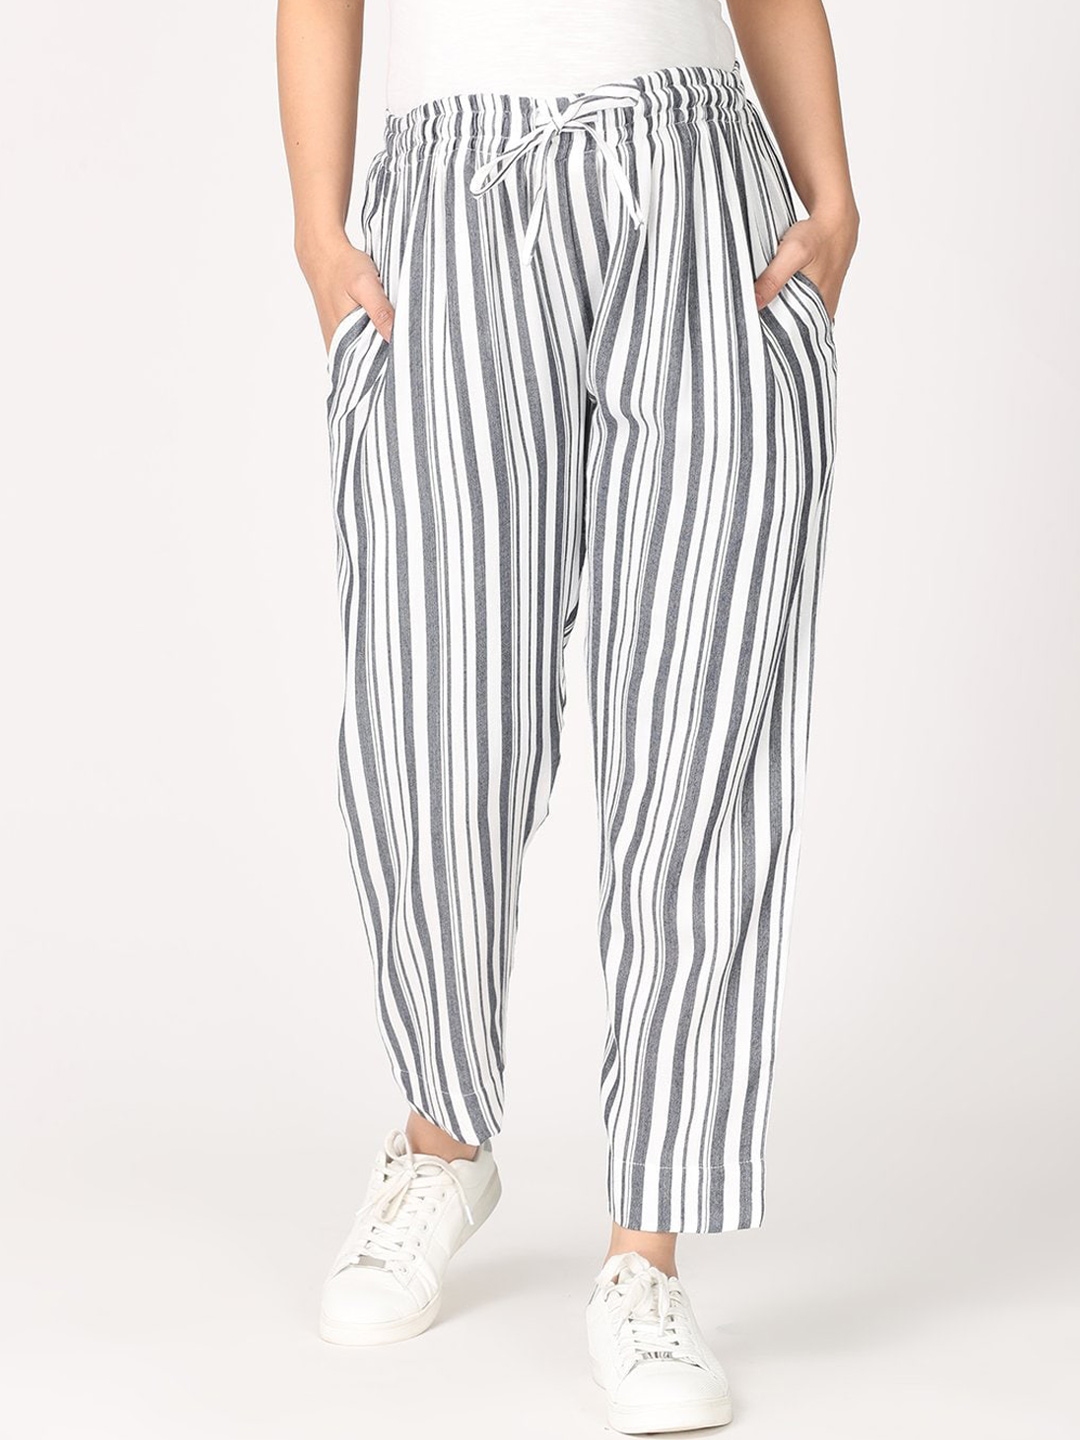 Buy The Mom Store Women Grey Striped Maternity Pleated Joggers Trousers